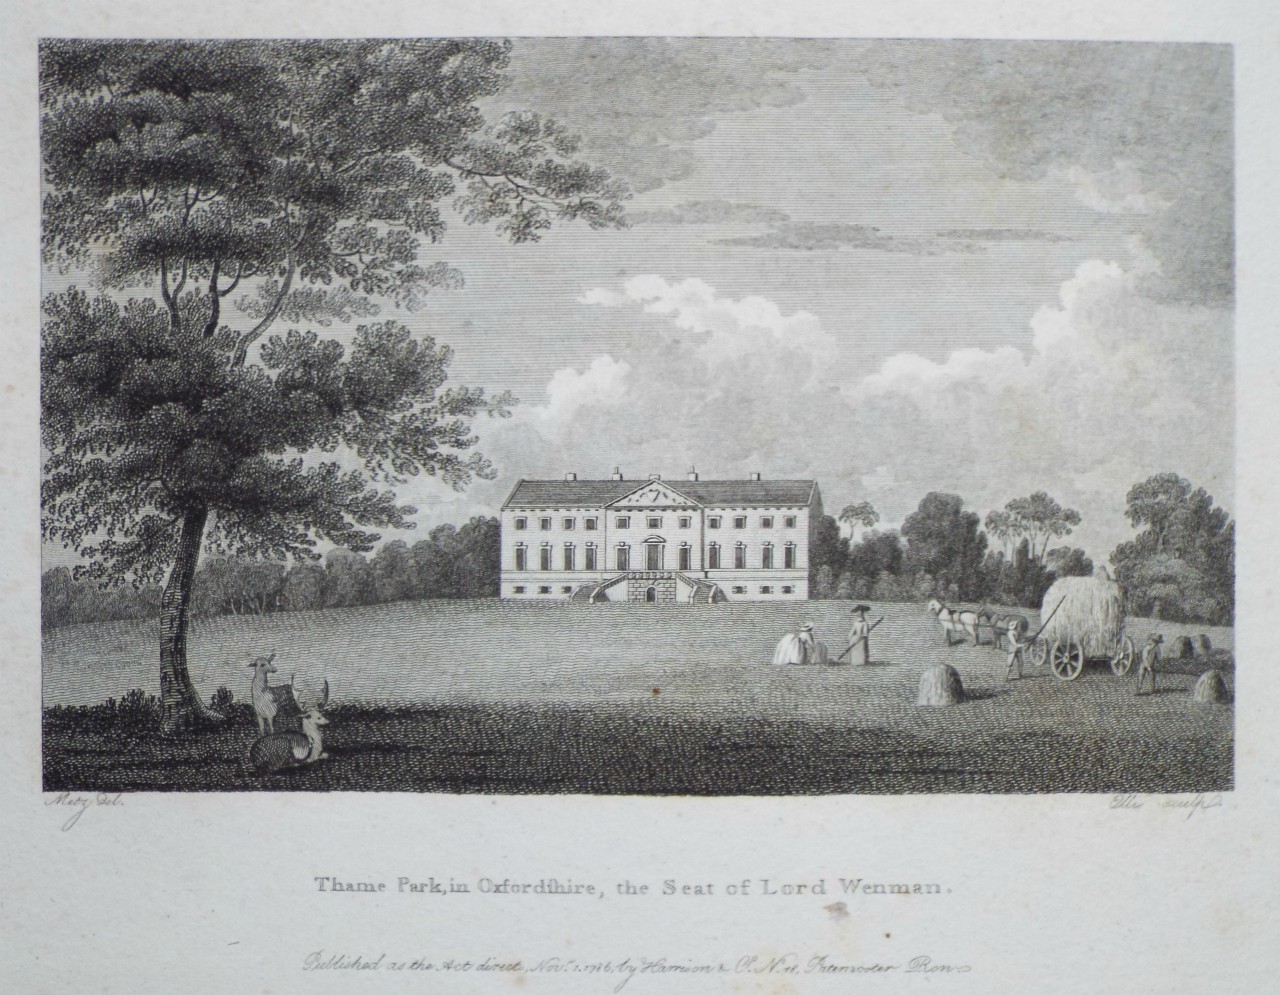 Print - Thame Park, in Oxfordshire, the Seat of Lord Wenman. - 